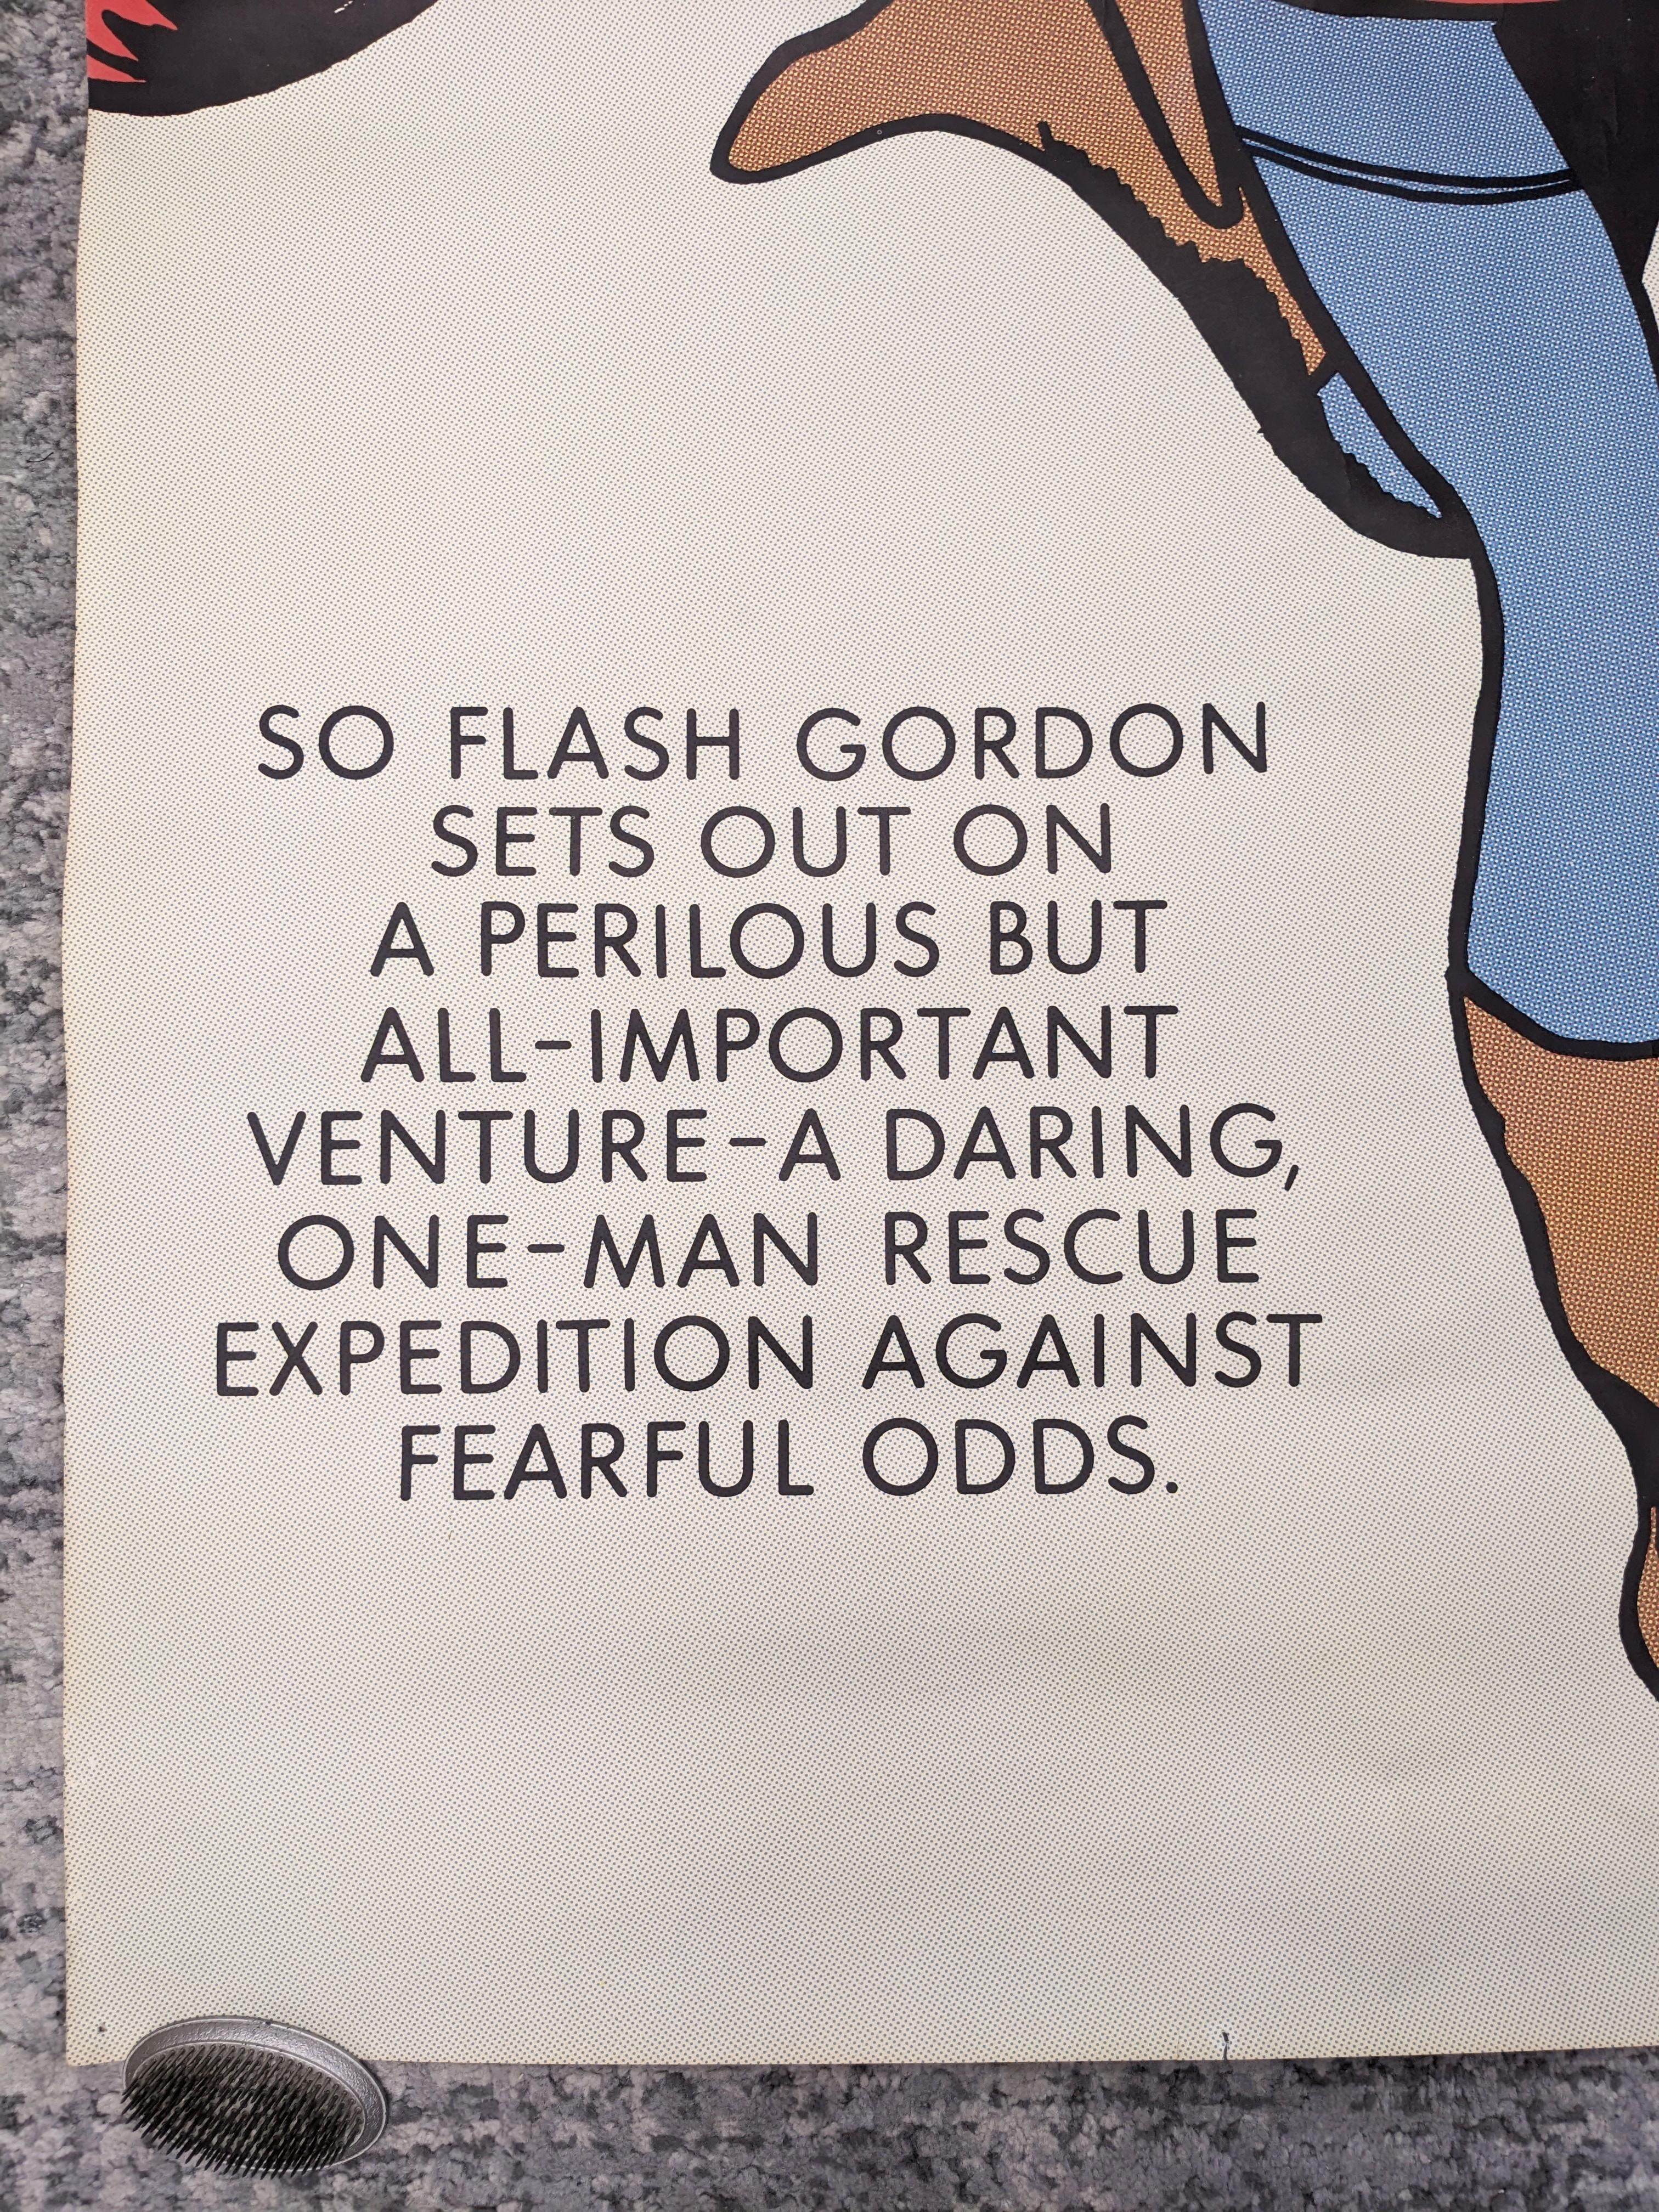 Large Flash Gordon Promotional Poster from the mid 1960's, printed like a comic book with tiny dots. Great graphics, would be great framed. If a half inch matte is used, the image would crisp and perfect for display. 1960's USA. 52